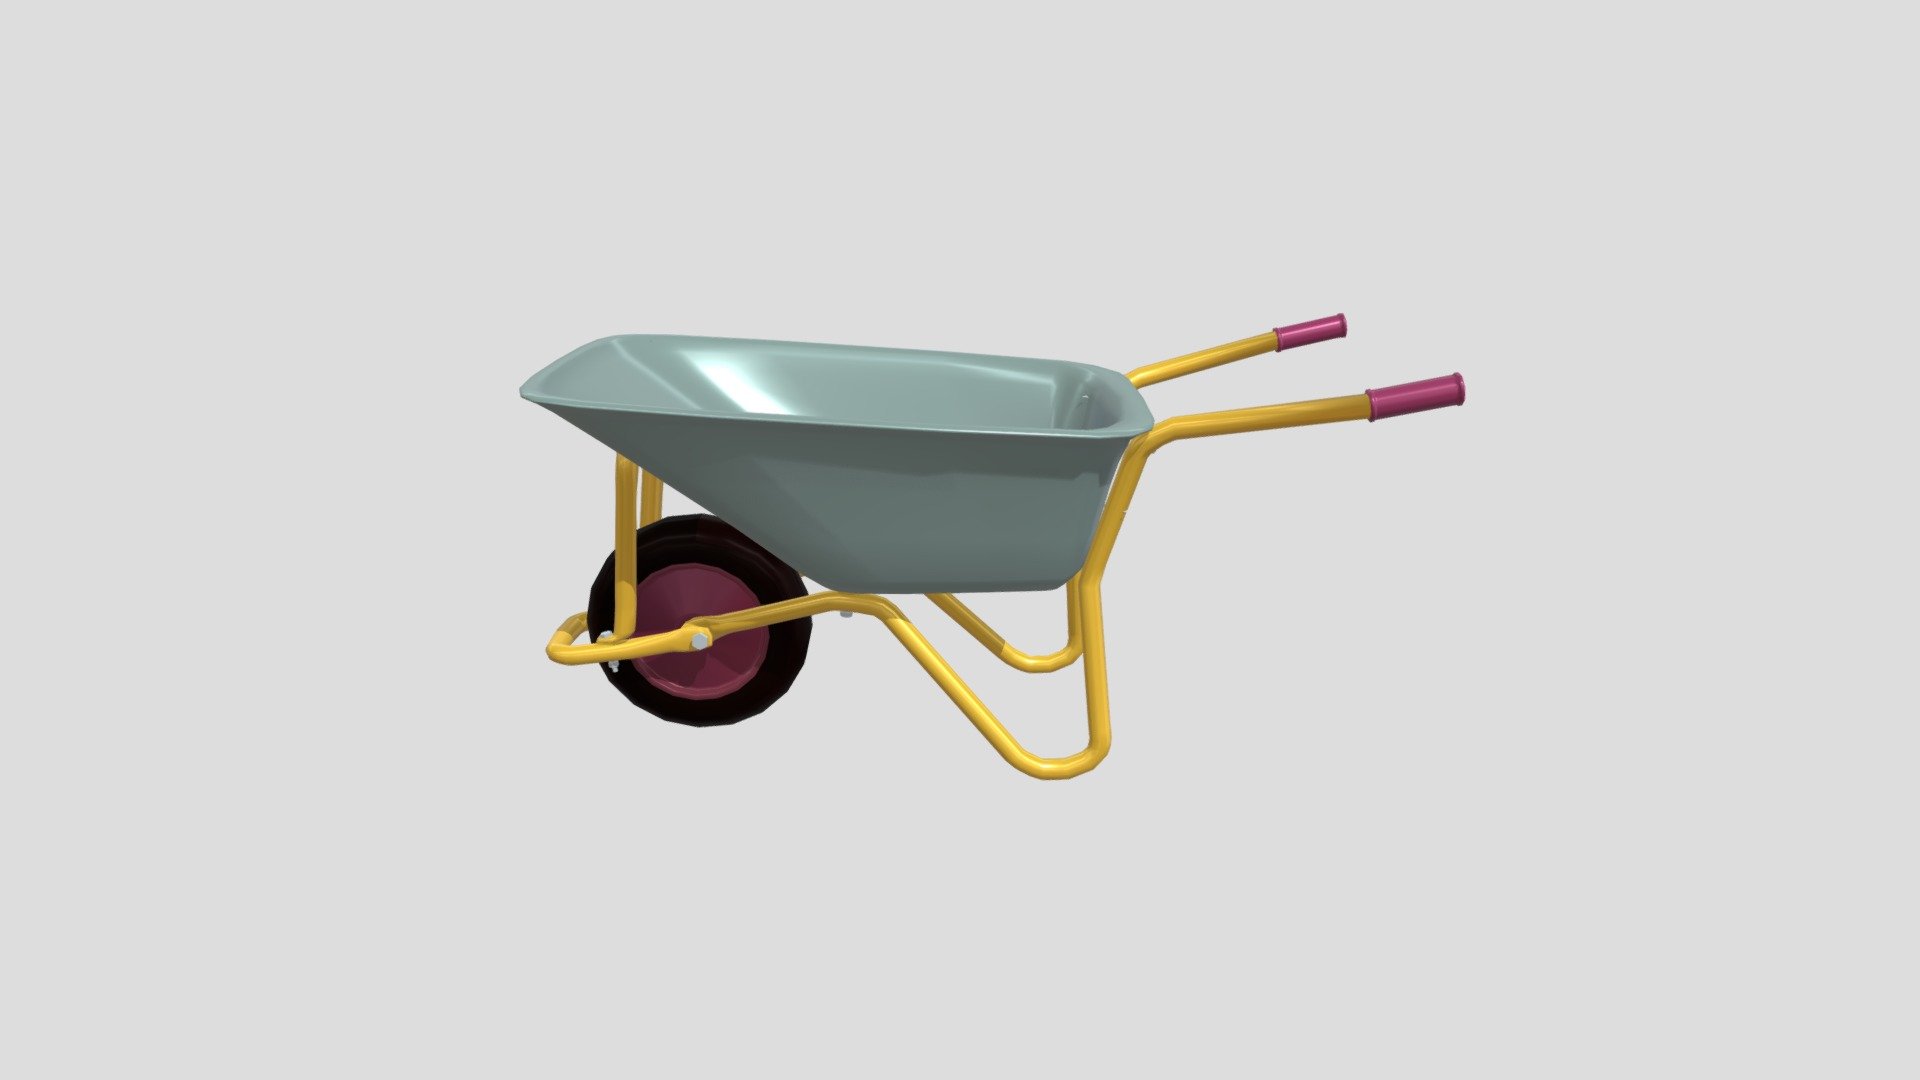 Please visit businessyuen.com for my other products.
Agricultural vehicle,
Farming vehicle - Trolley V7 - Buy Royalty Free 3D model by businessyuen 3d model